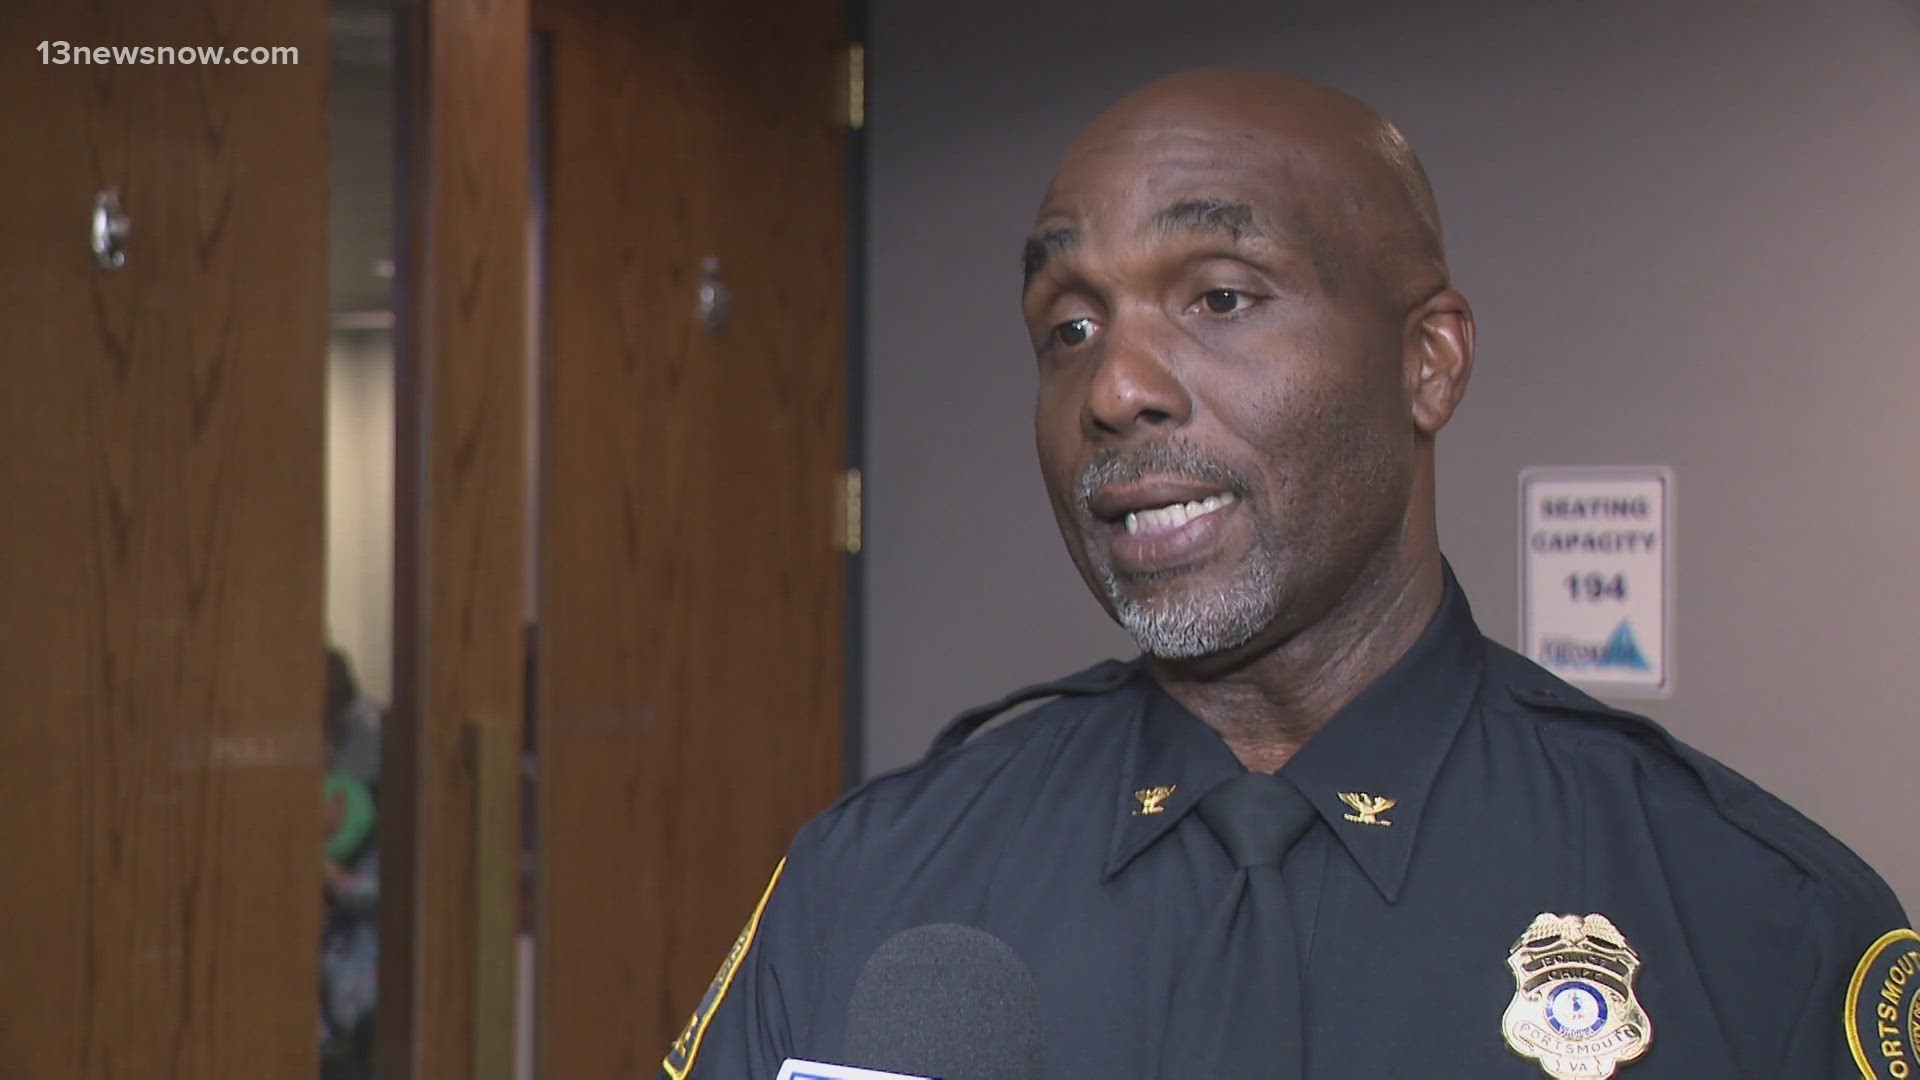 Chief Stephen Jenkins spoke with 13News Now about the rash of gun violence that has rocked the City of Portsmouth, and he did not mince words.